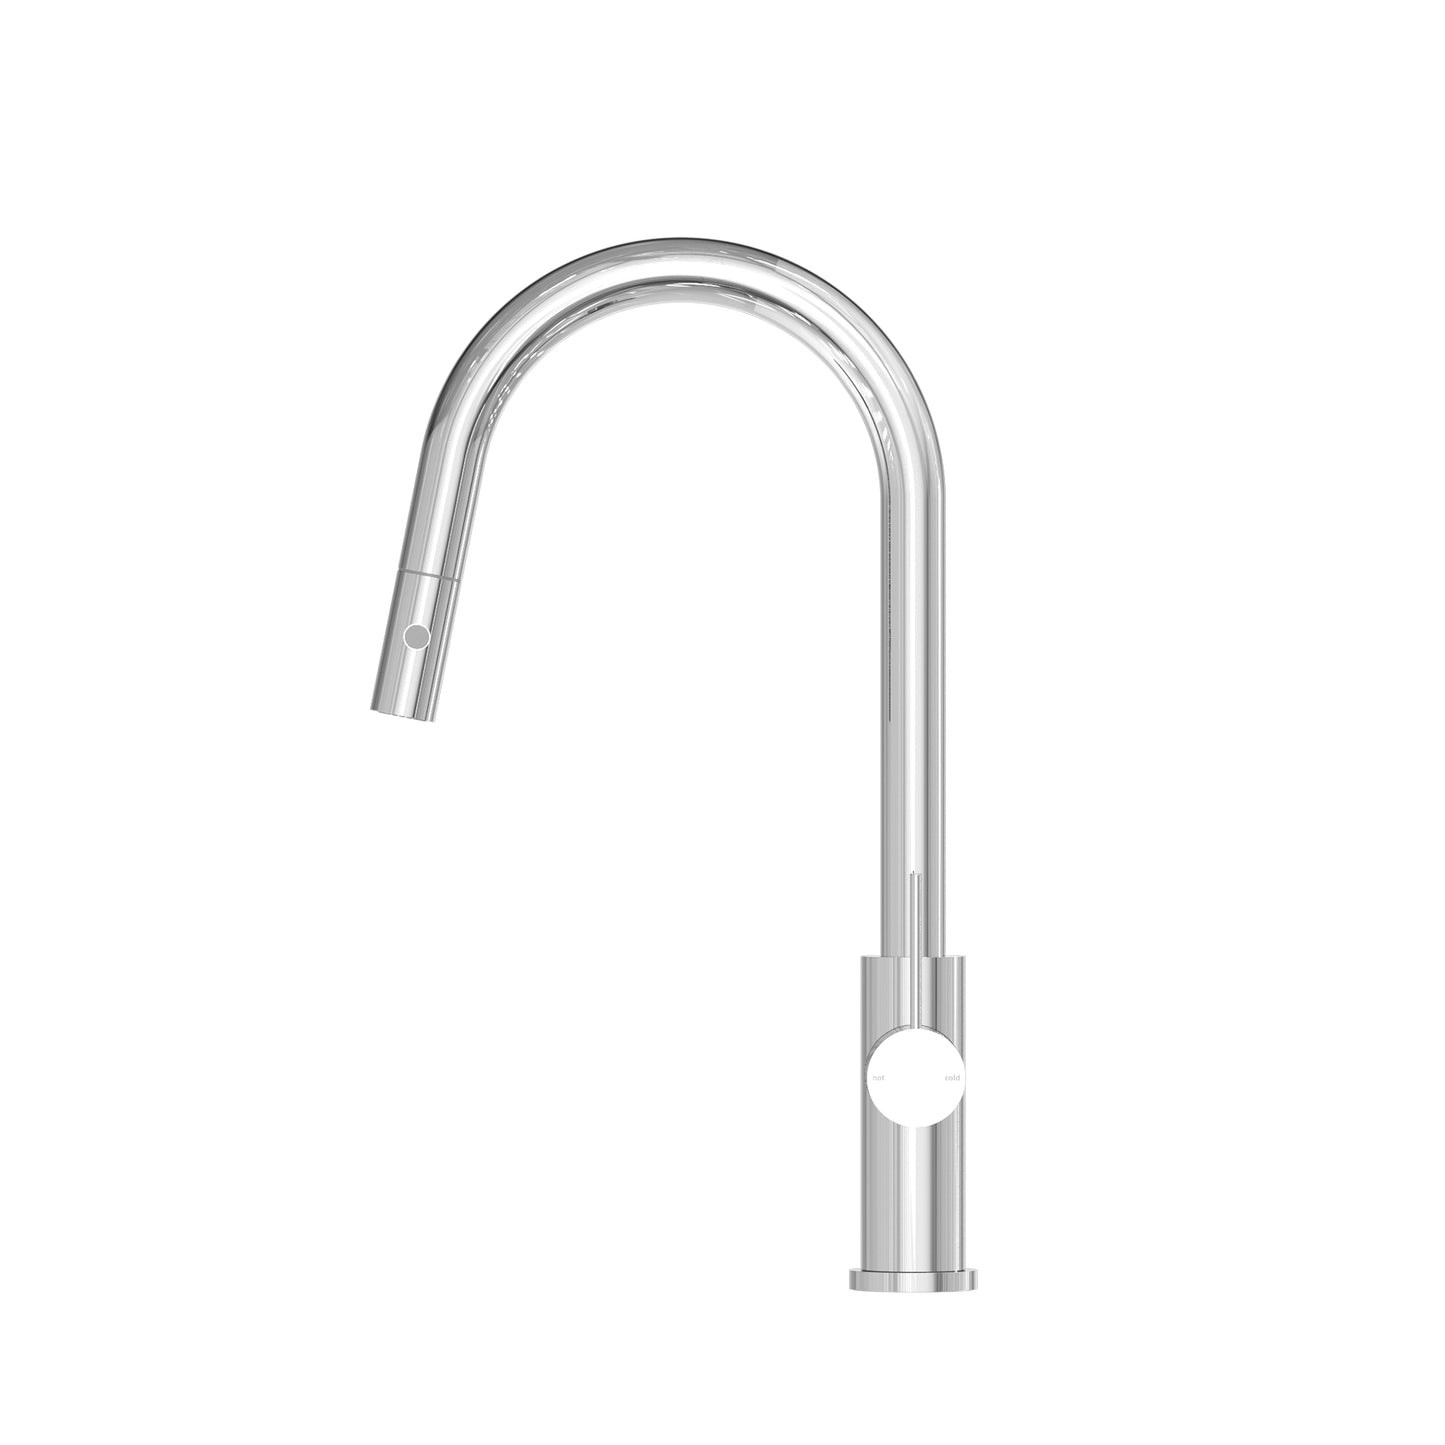 Mecca Chrome Pull Out Sink Mixer With Vegie Spray Function